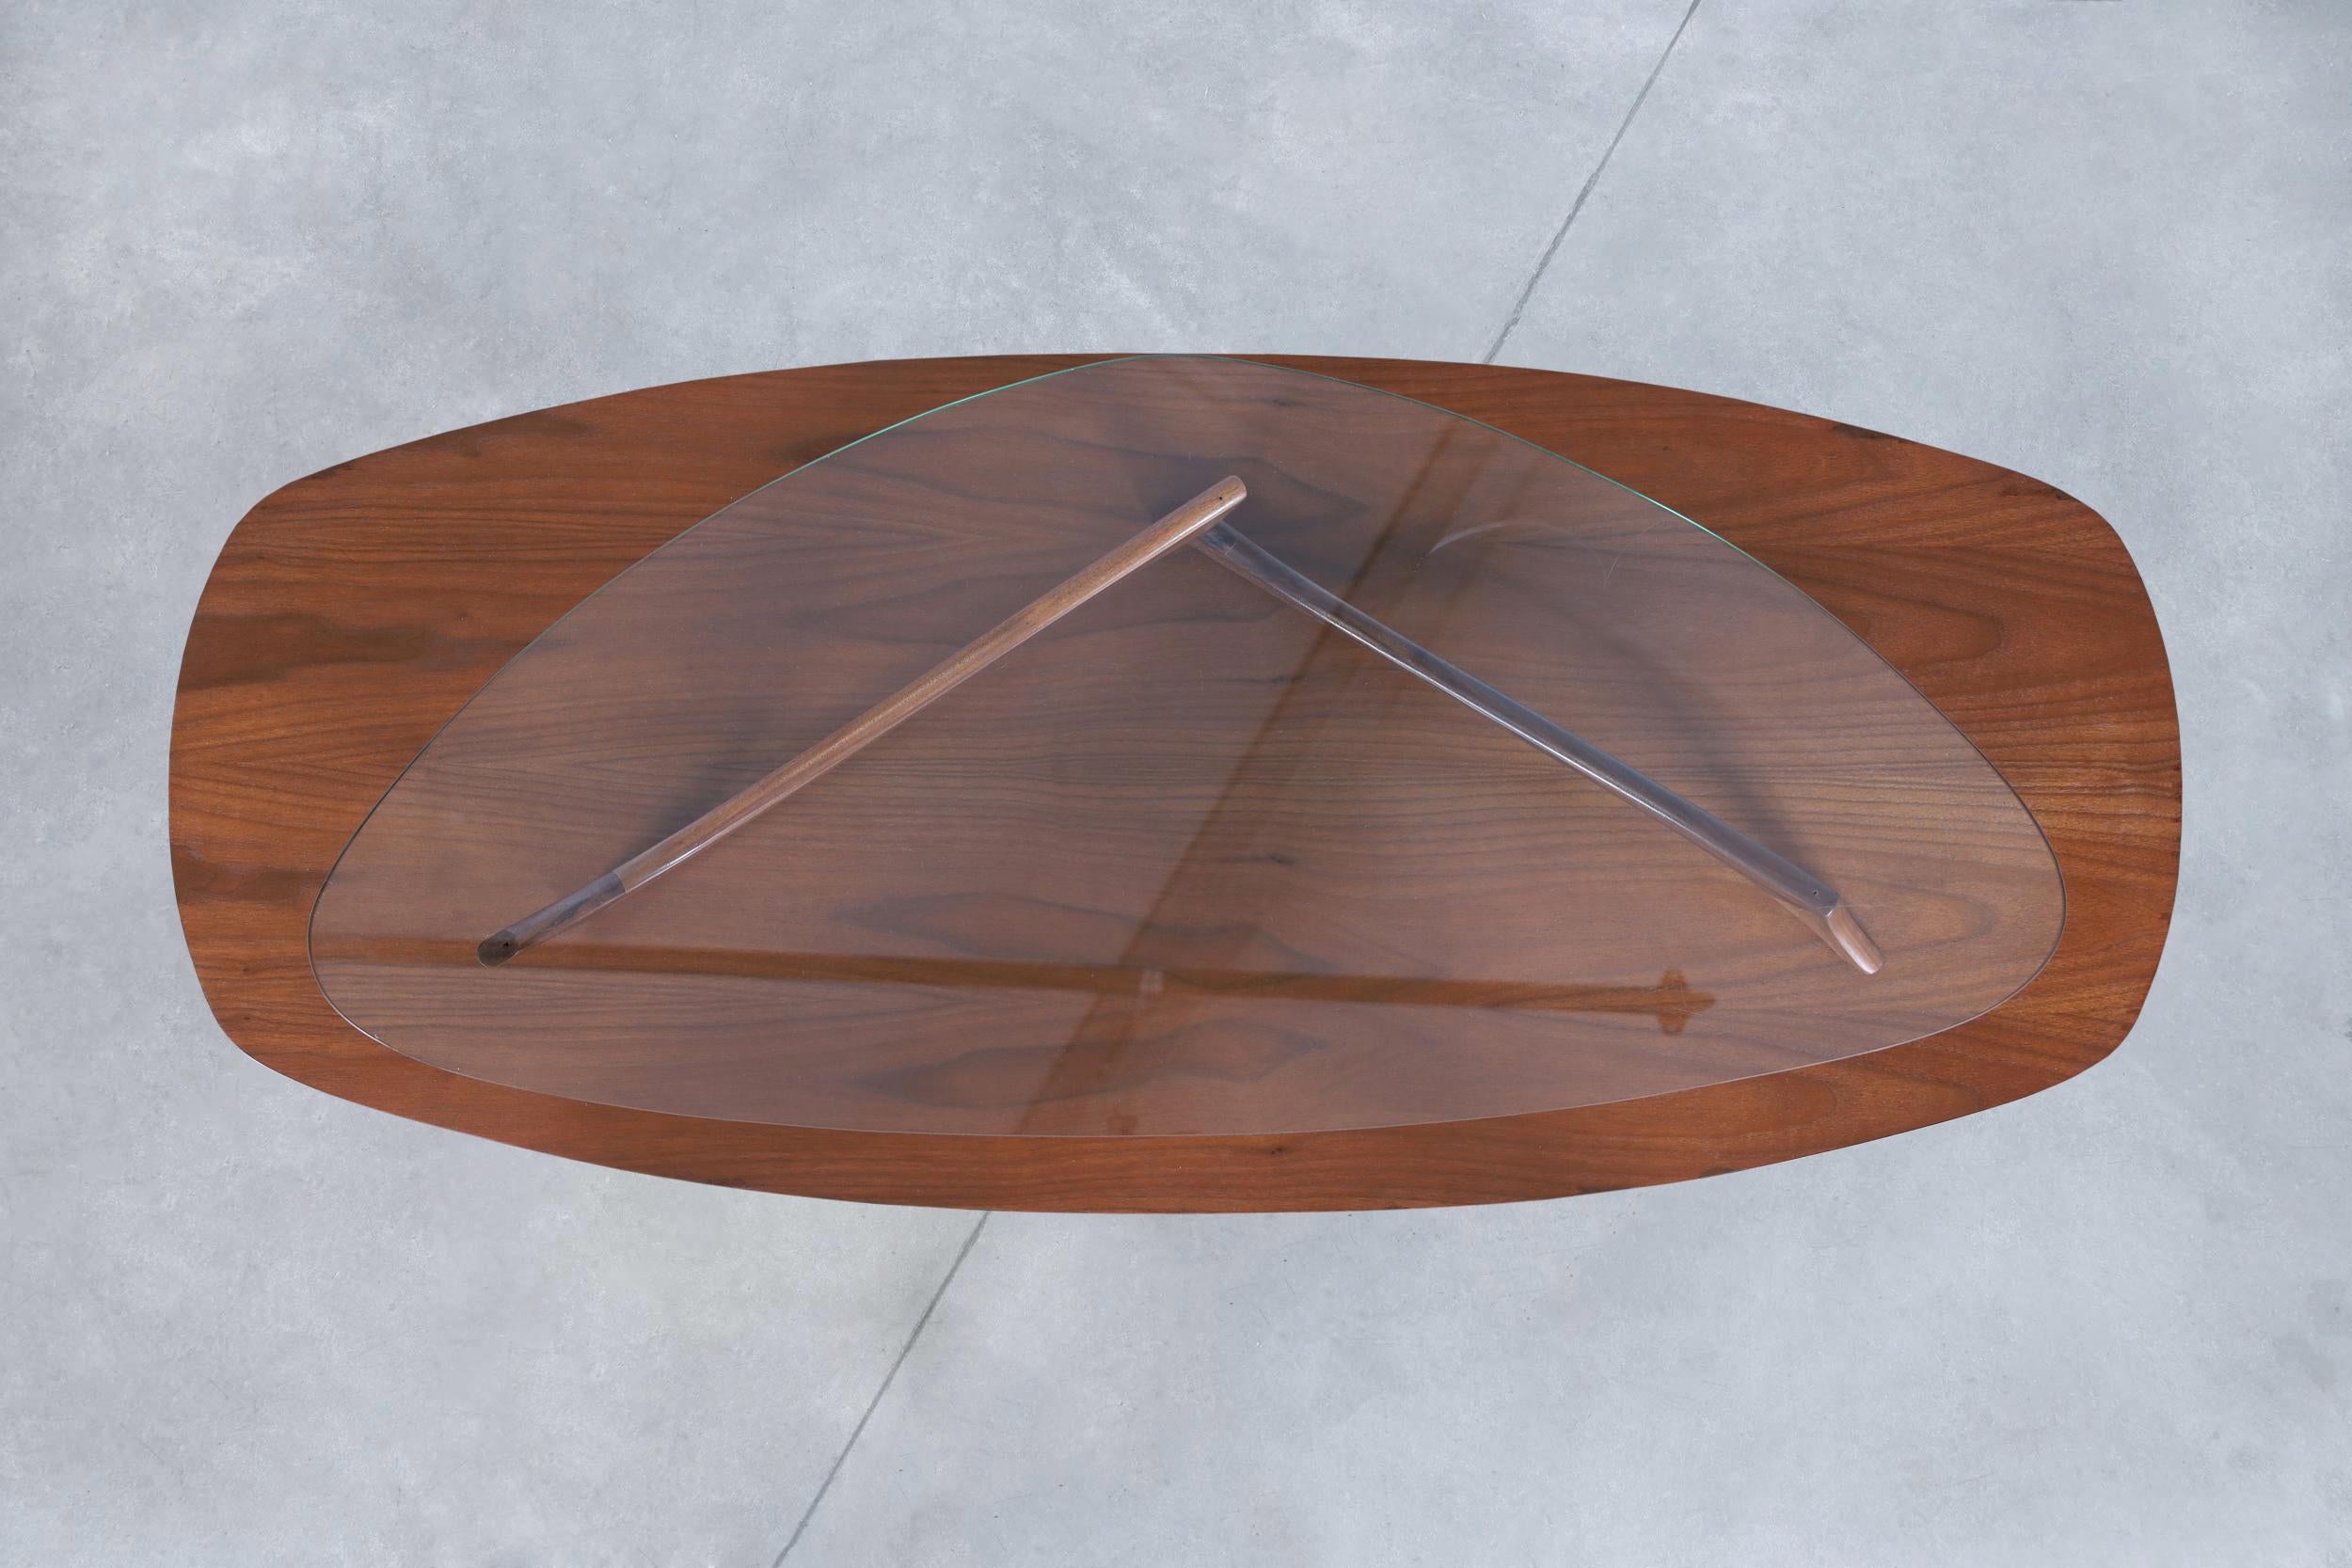 Vintage Sculptural Walnut Coffee Table Styled After Vladimir Kagan For Sale 3